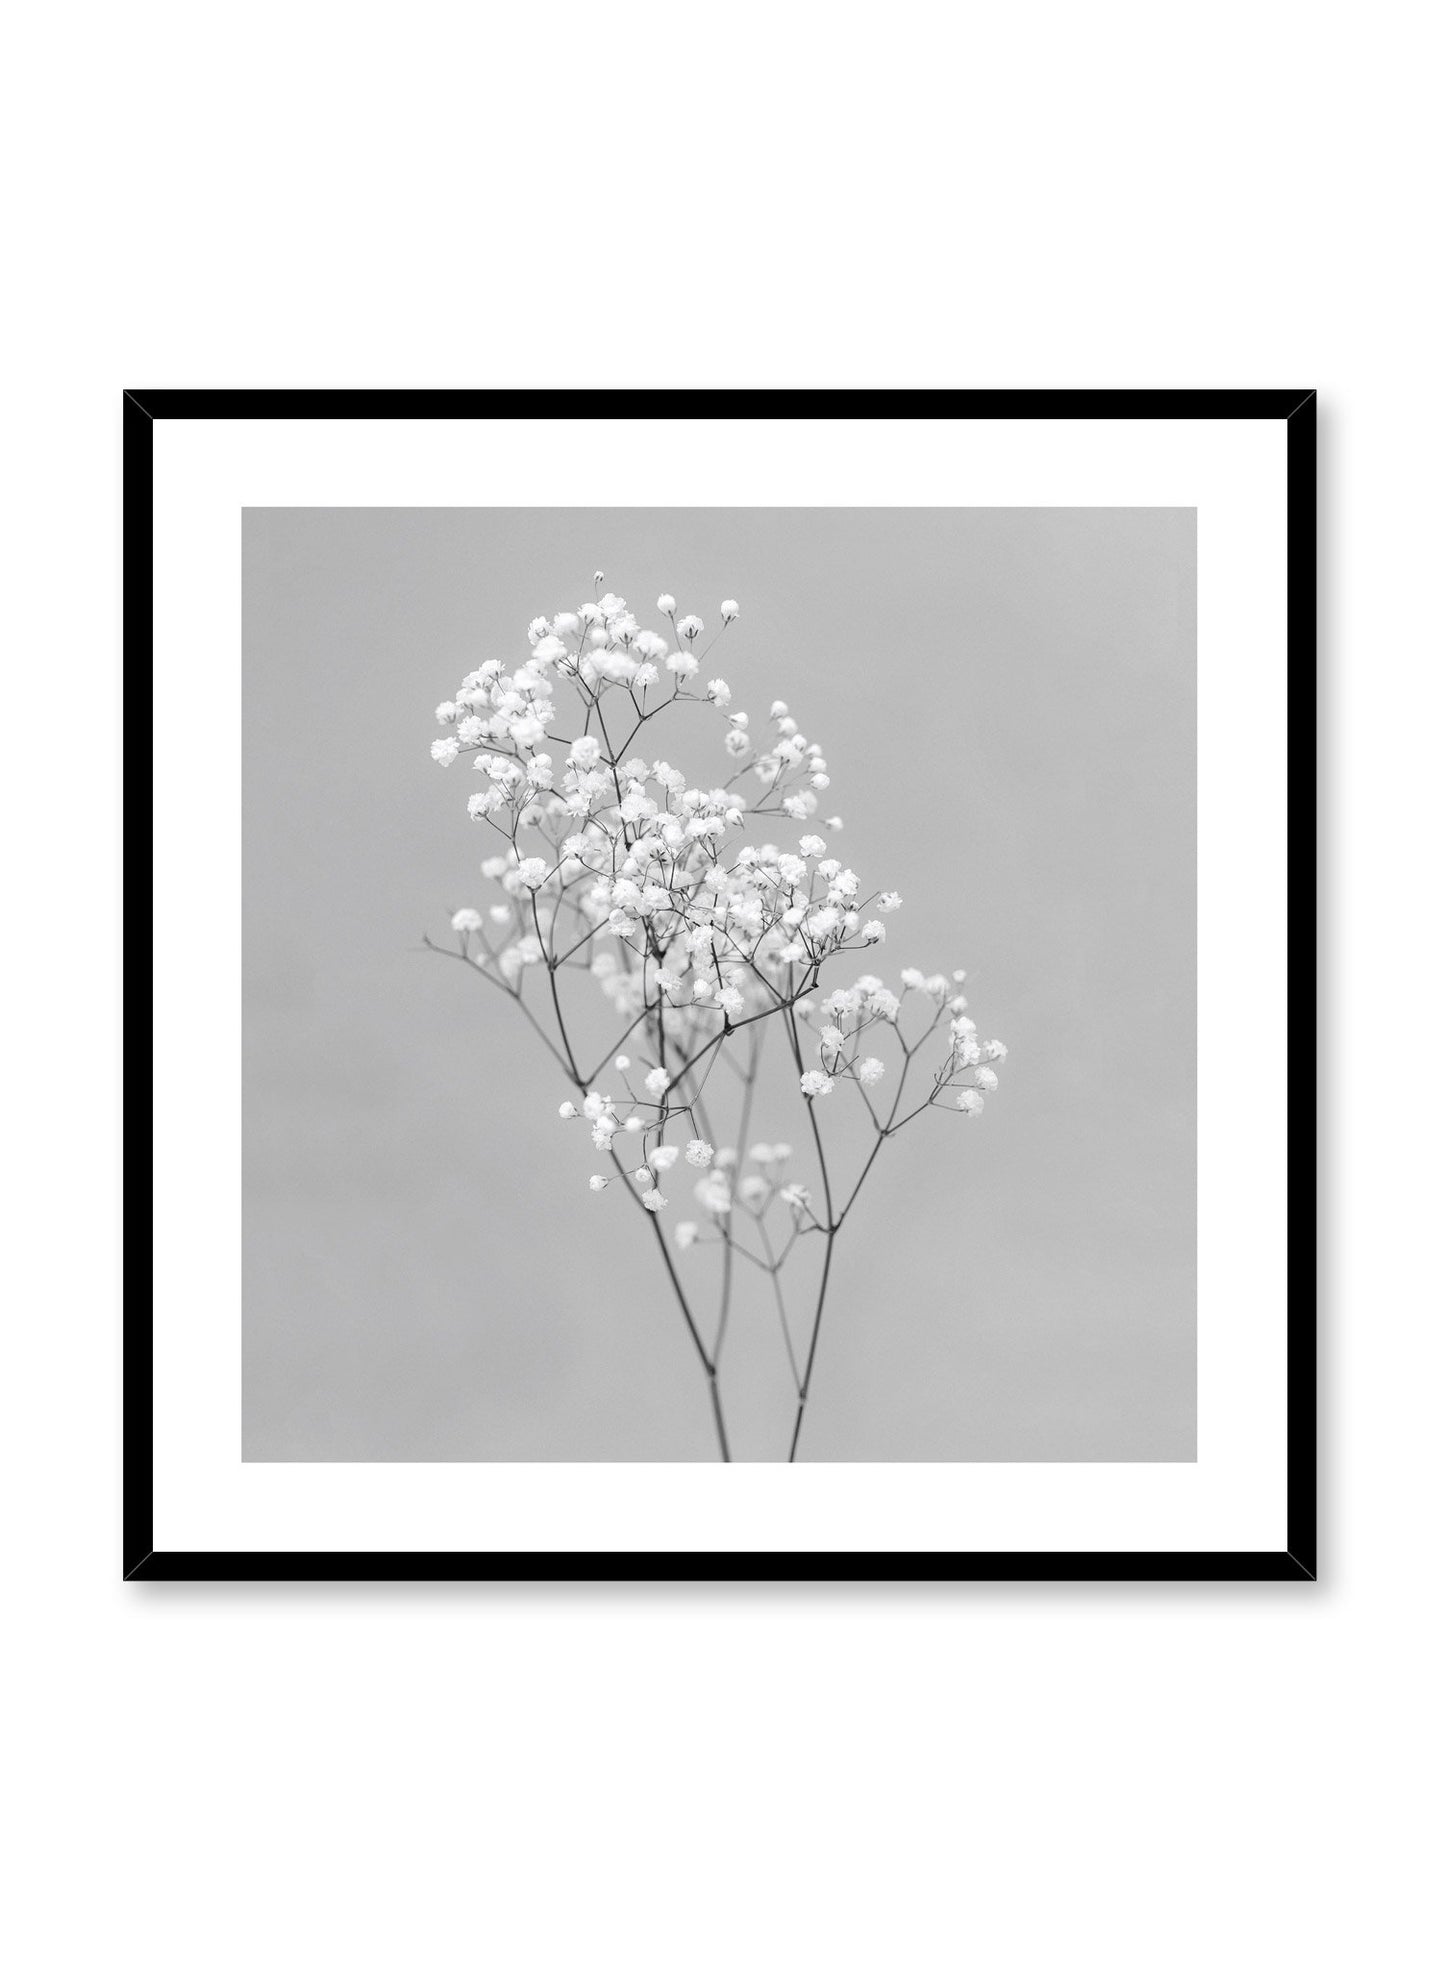 Minimalistic square wall photography by Opposite Wall with Baby's Breath flower in black and white